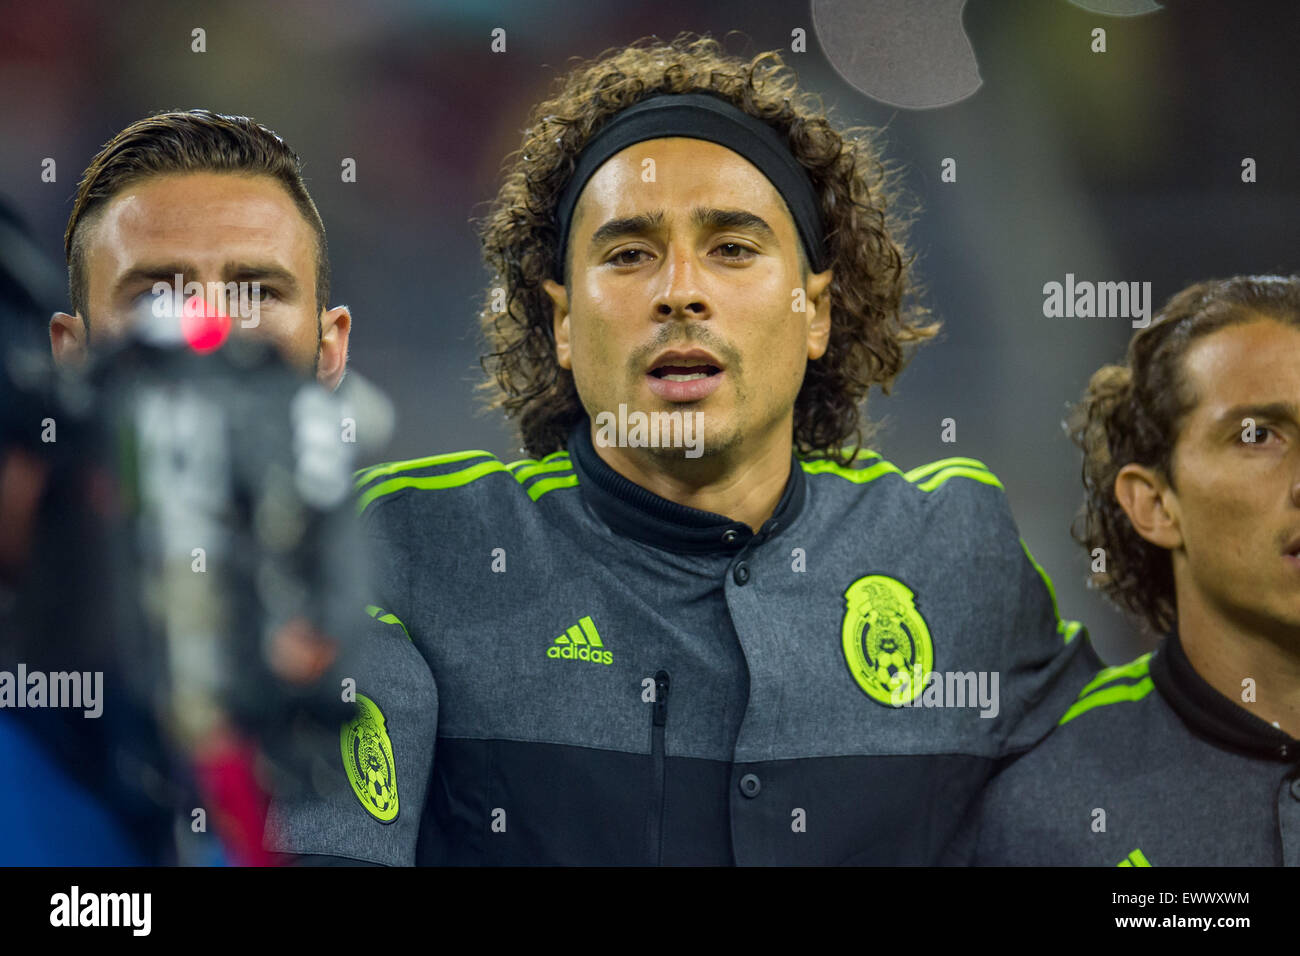 Houston, TX, USA. 1st July, 2015. Mexico goalkeeper Guillermo Ochoa (13) signs the national anthem prior to an international soccer match between Honduras and Mexico at NRG Stadium in Houston, TX. Trask Smith/CSM/Alamy Live News Stock Photo